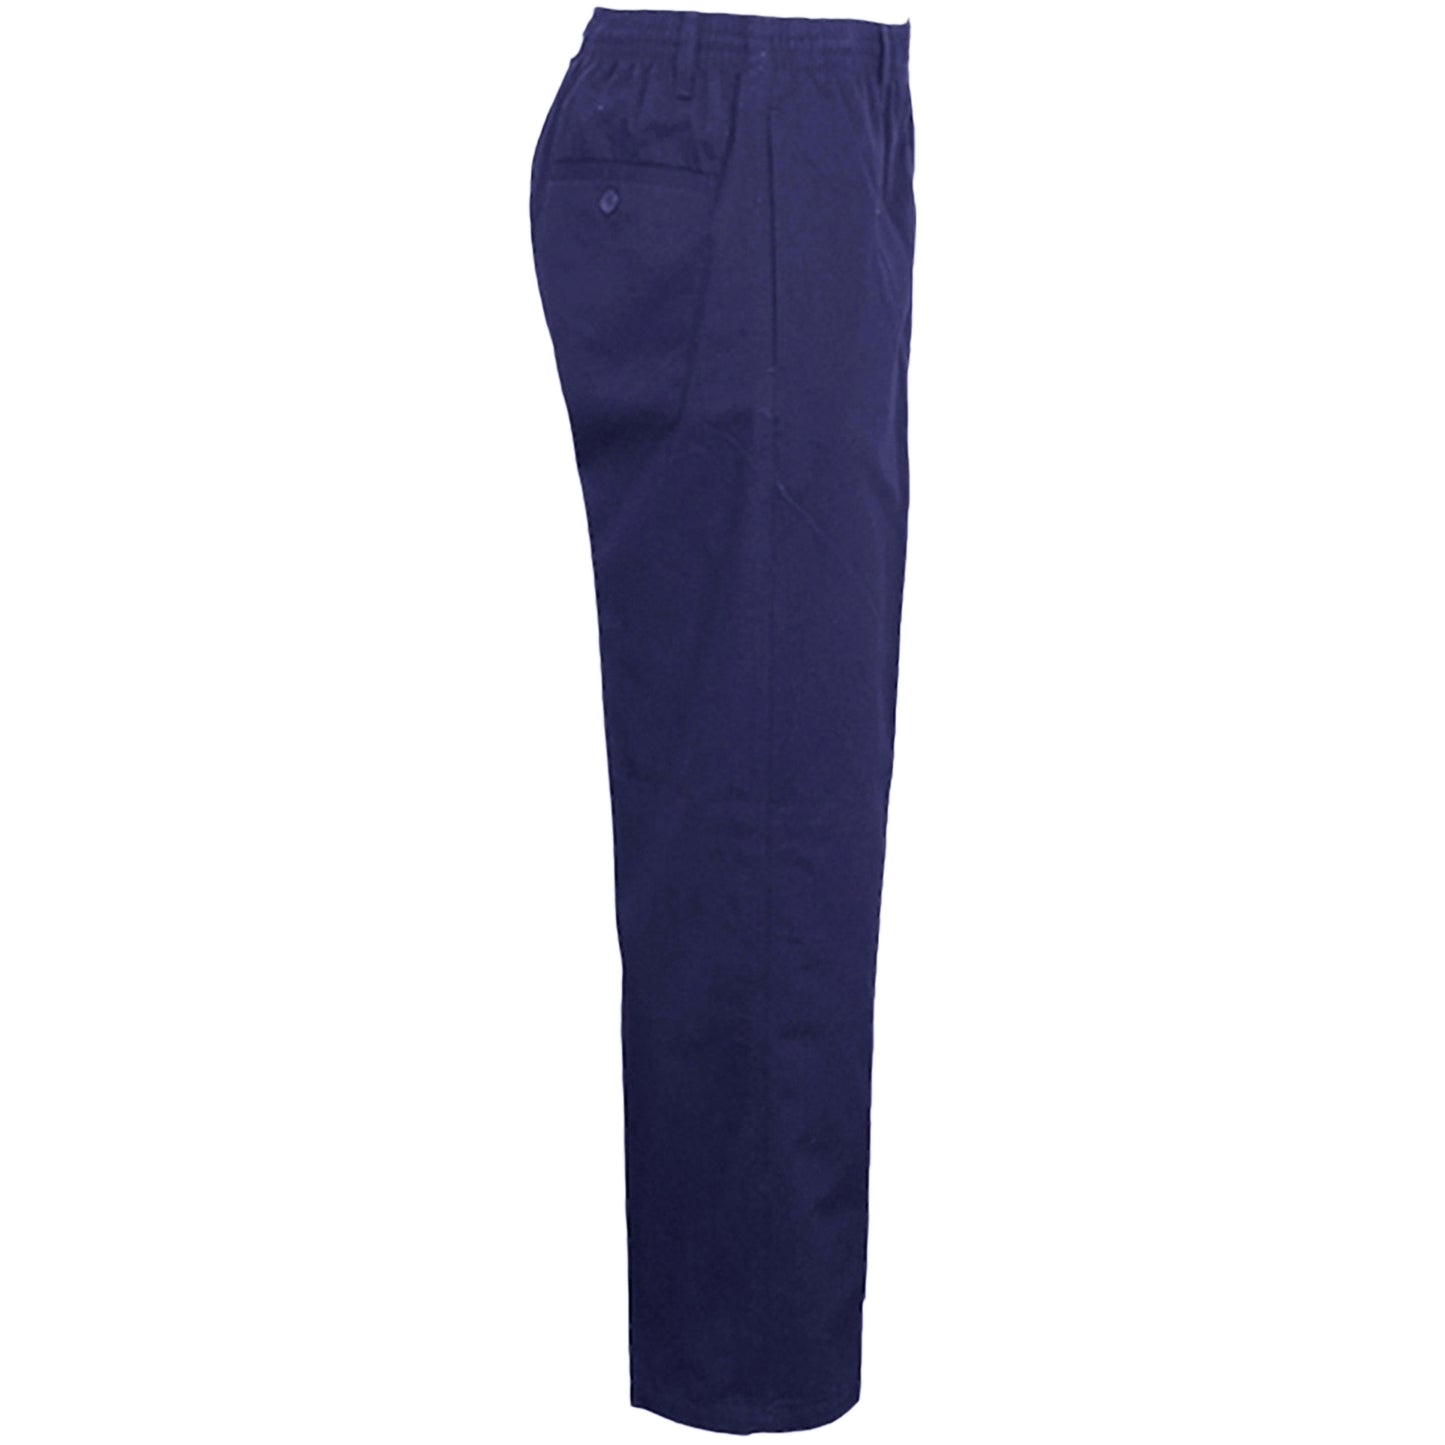 MENS RUGBY TROUSERS FULL ELASTICATED WAIST CASUAL SMART POCKET PANTS BIG PLUS SIZE 42" to 48"